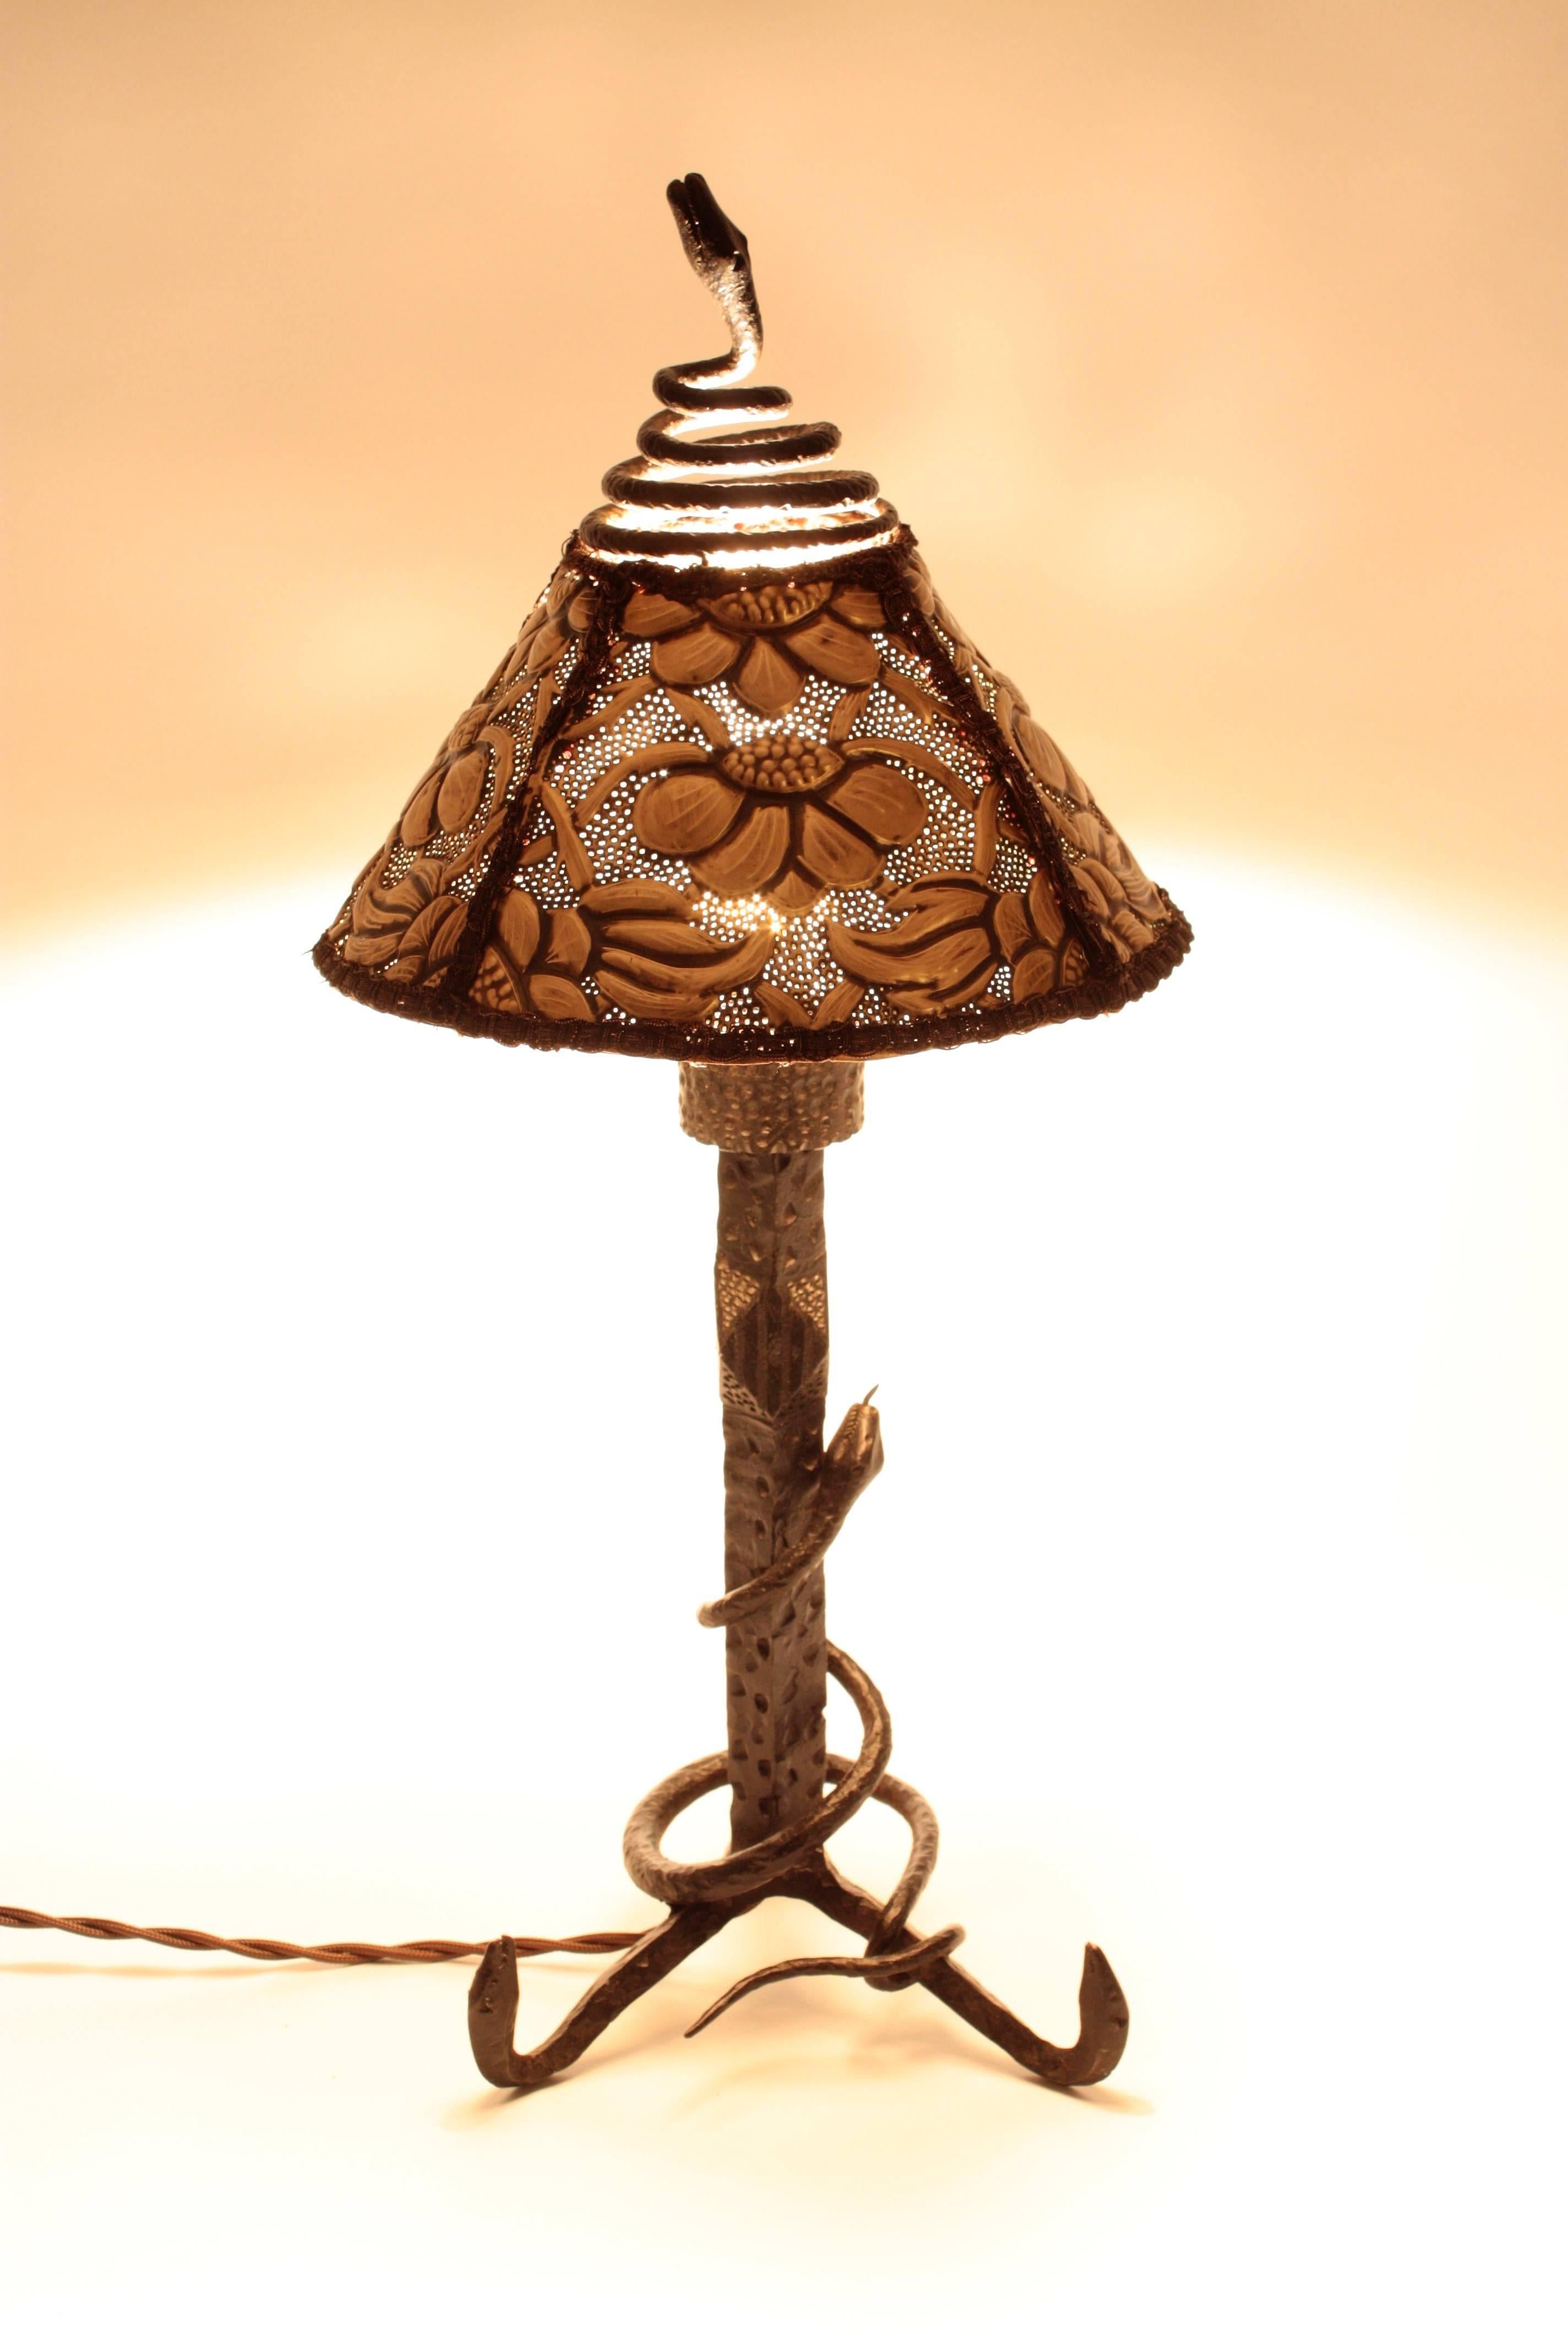 Art Nouveau Antoni Gaudi Style Table Lamp in Hand Forged Iron and Brass Repoussé